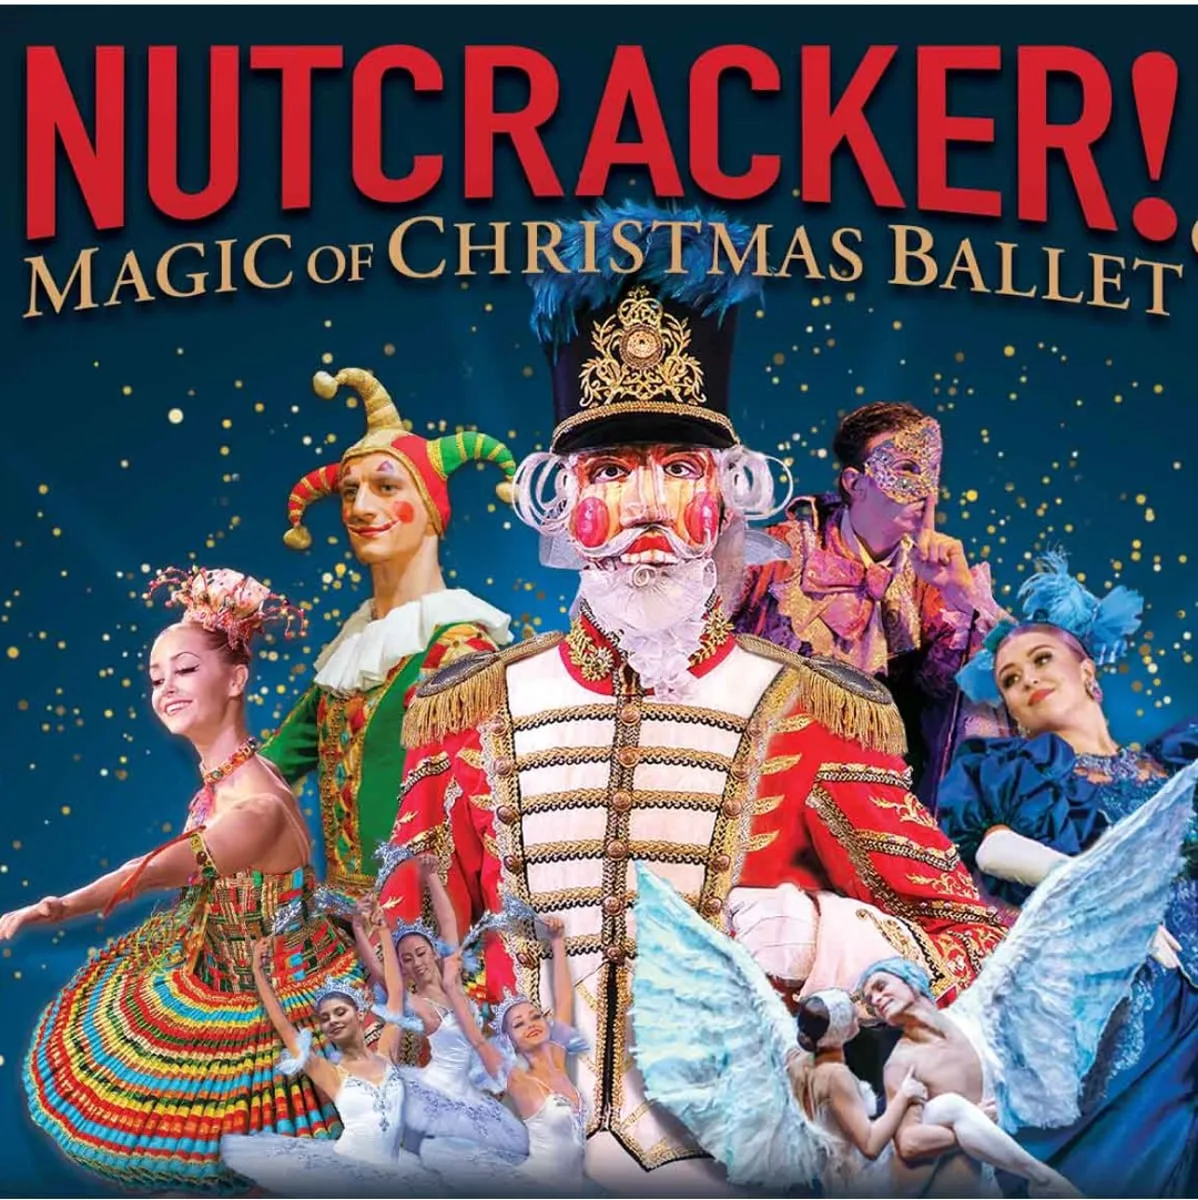 The Nutcracker: Magic of Christmas Ballet poster for the Tennessee Theater